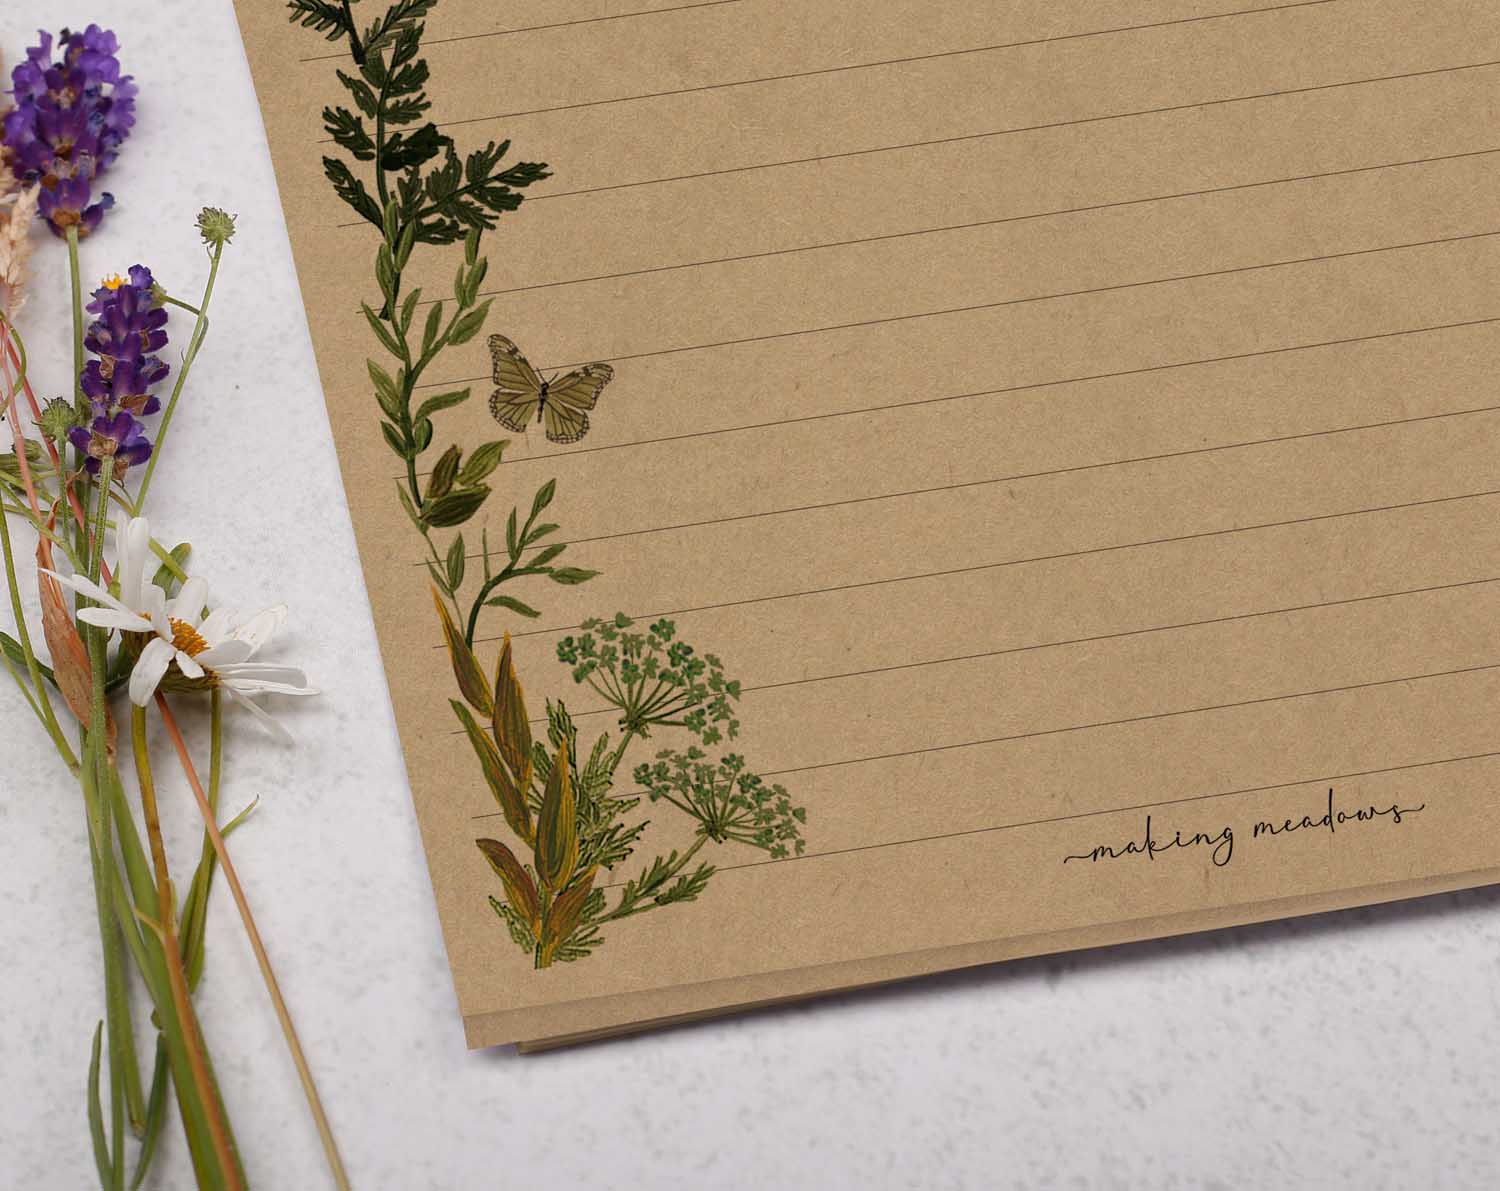 A5 Kraft letter writing paper sheets with botanical leaves design.